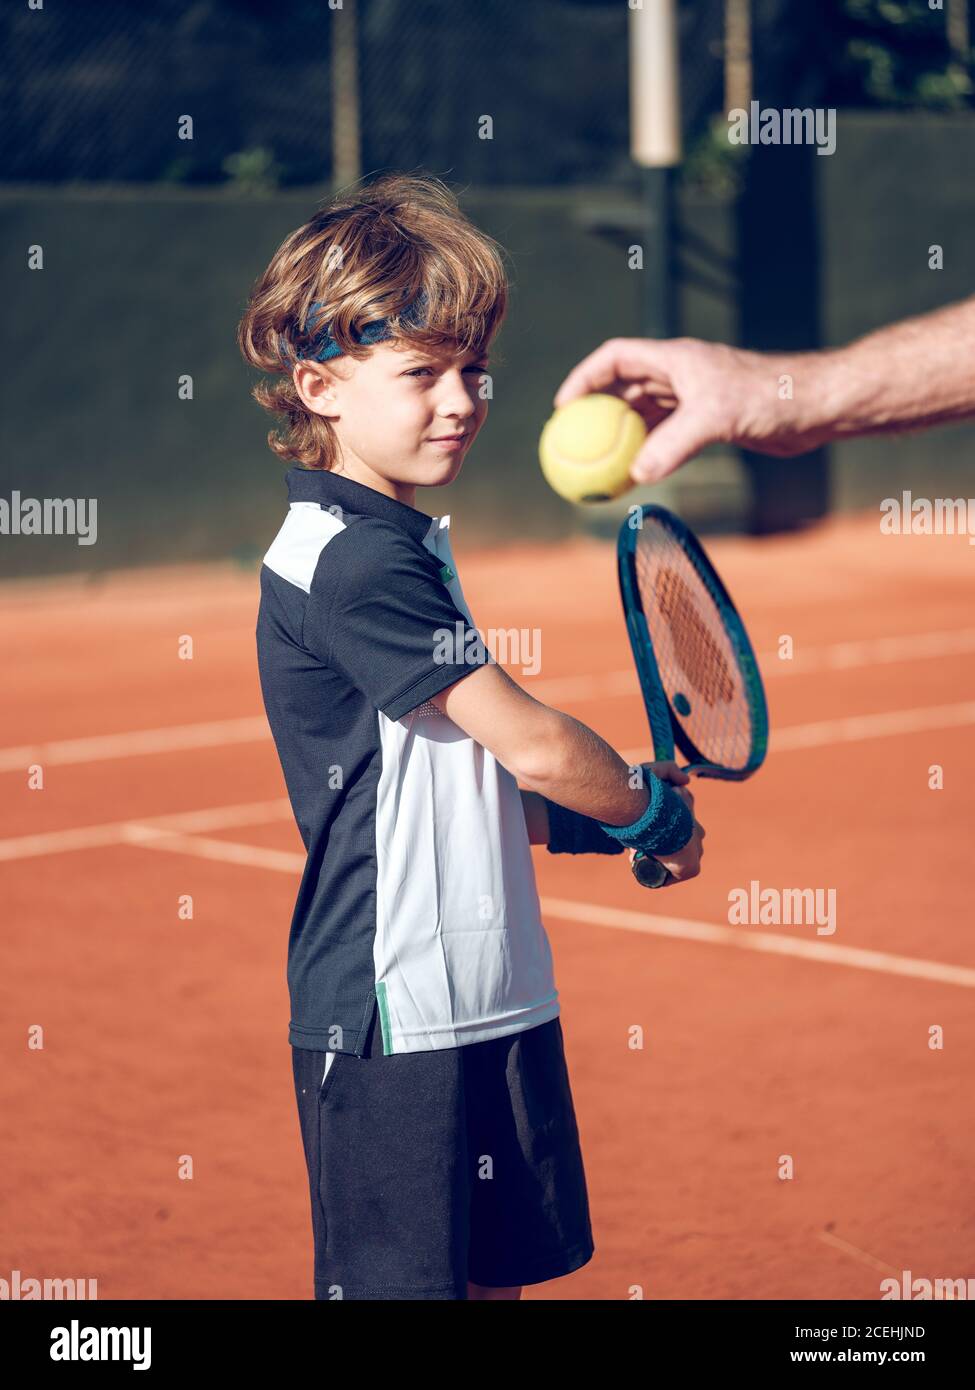 Ball Boy Holding Tennis Ball High Resolution Stock Photography And Images Alamy